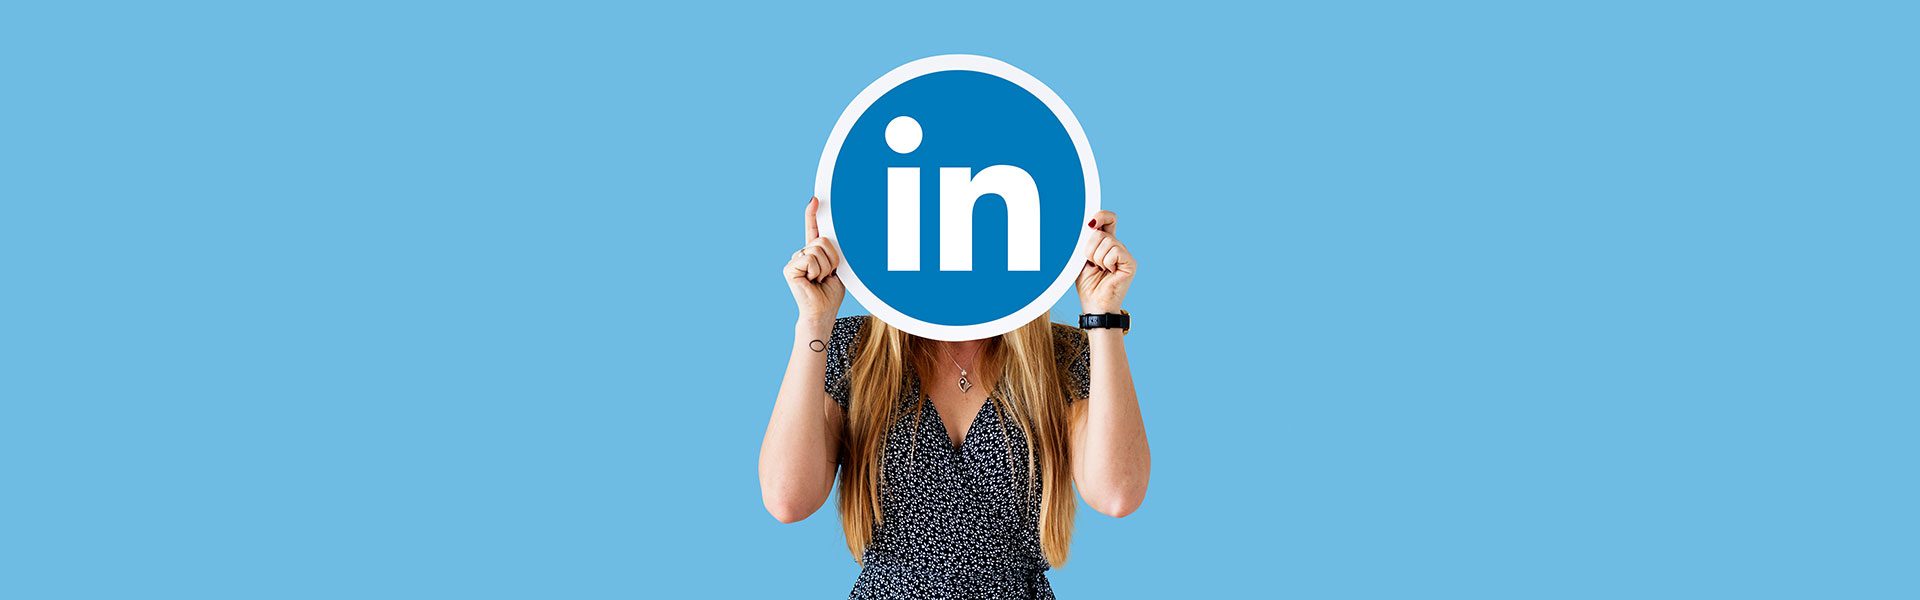 LinkedIn marketing tips to grow your personal brand